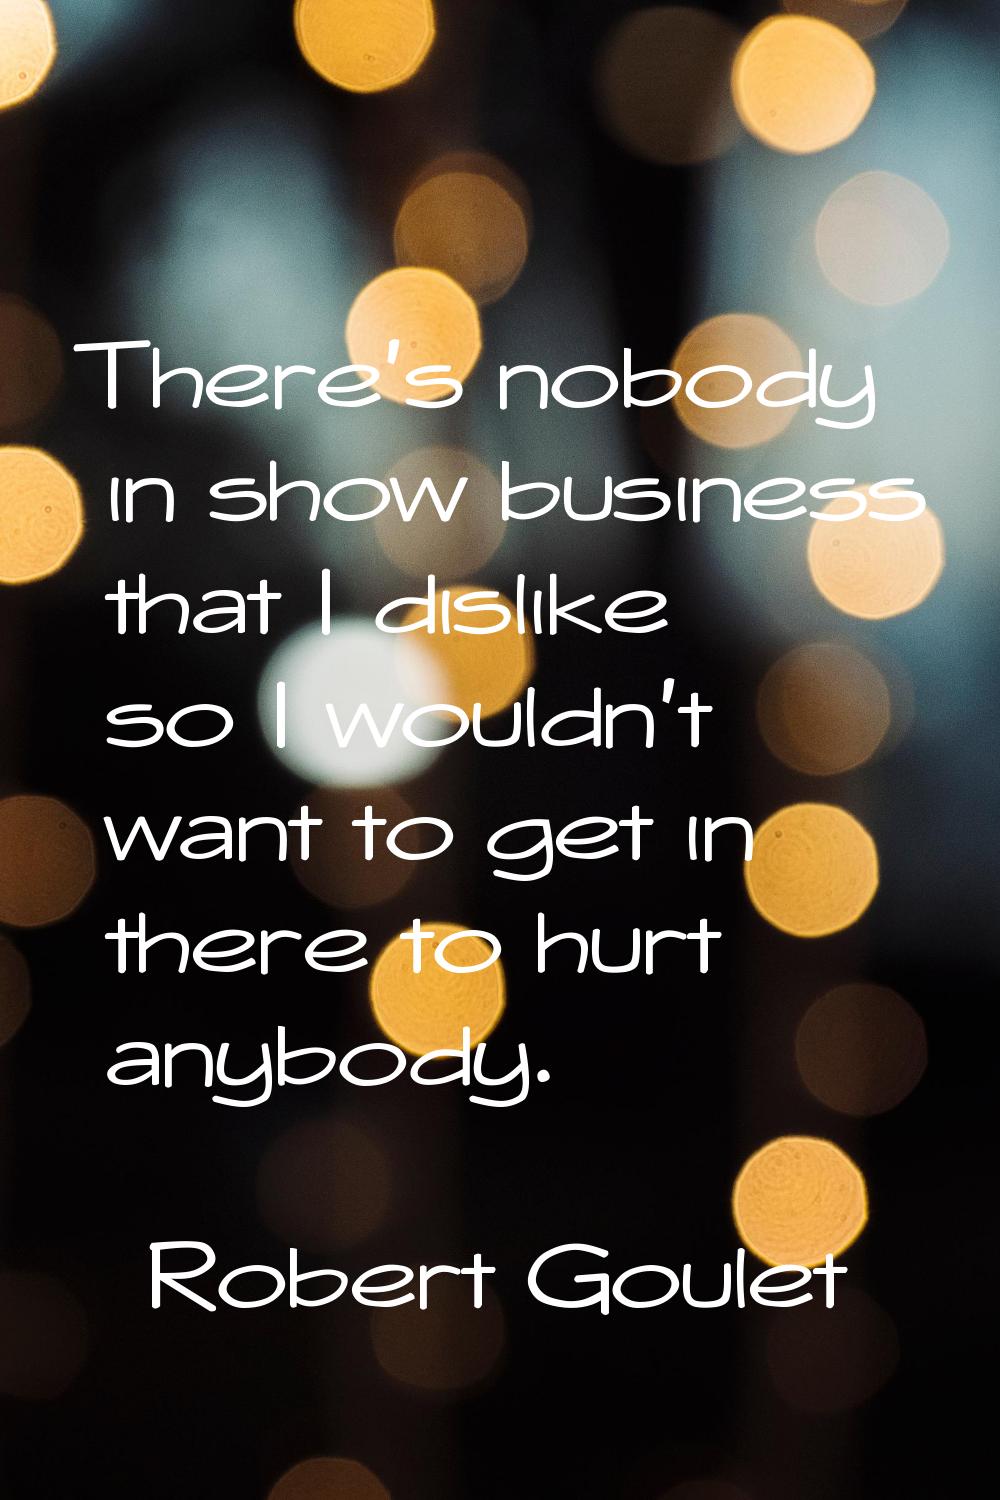 There's nobody in show business that I dislike so I wouldn't want to get in there to hurt anybody.